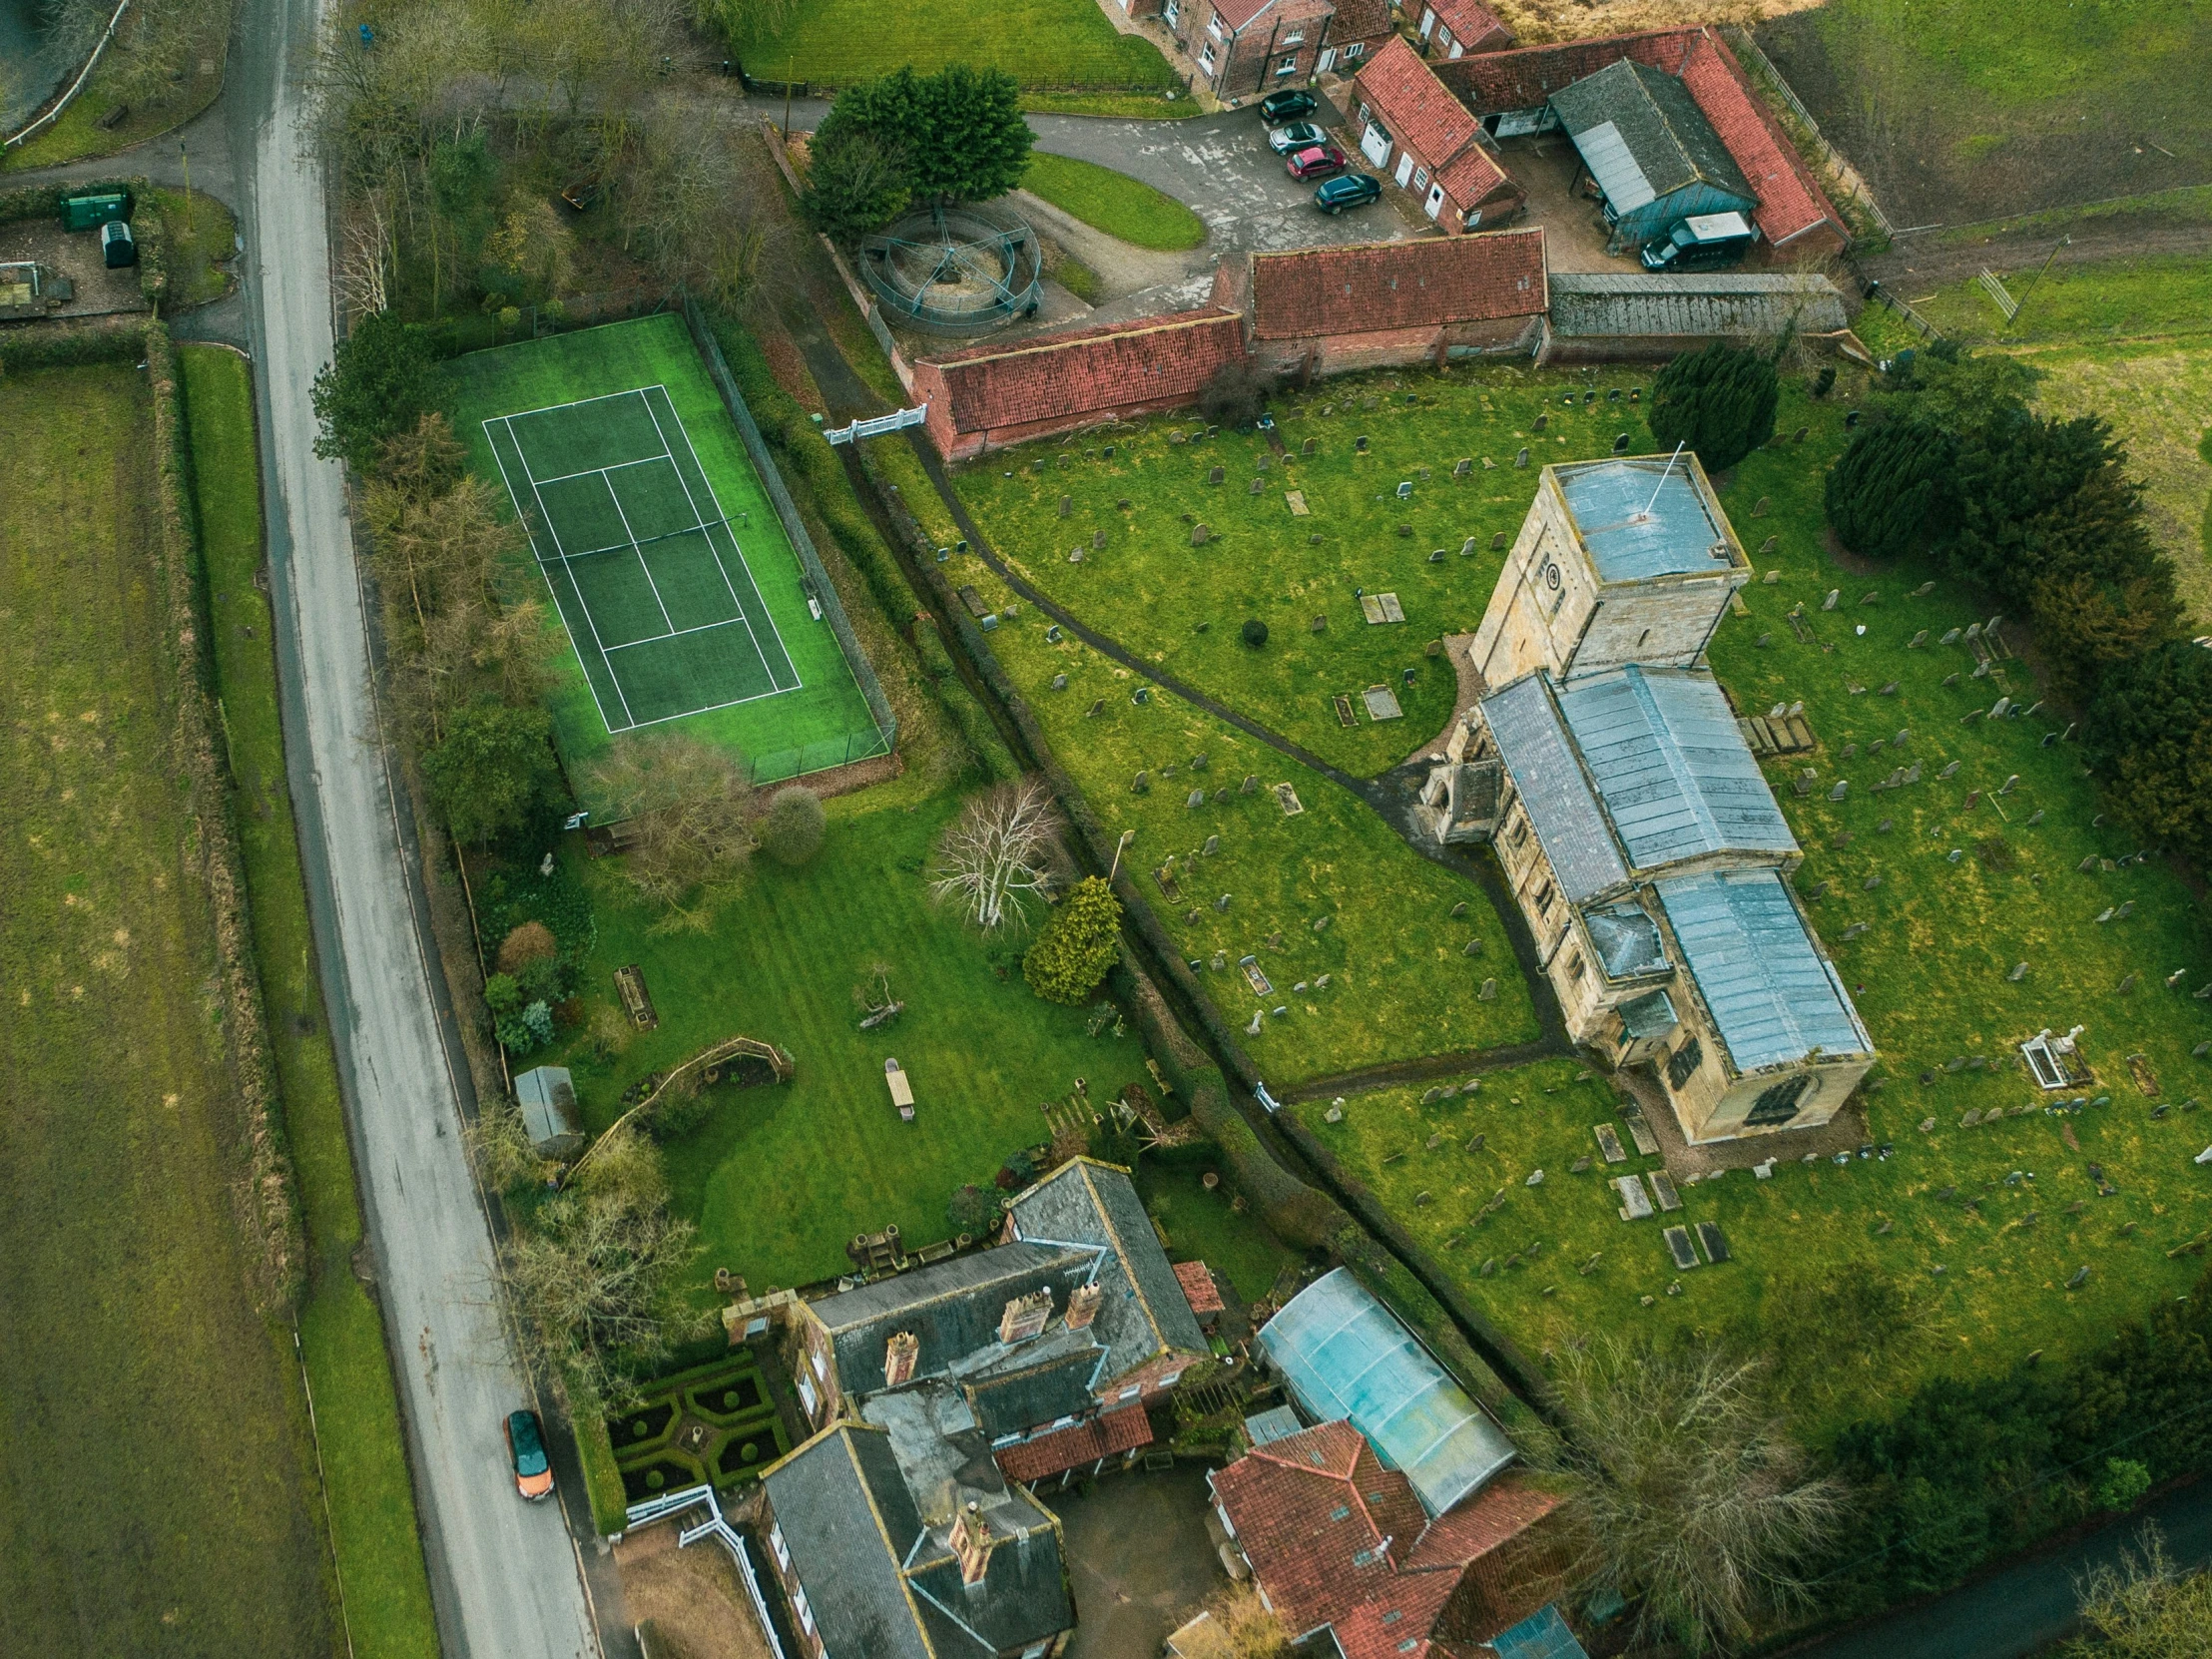 an aerial view of the green grass and houses